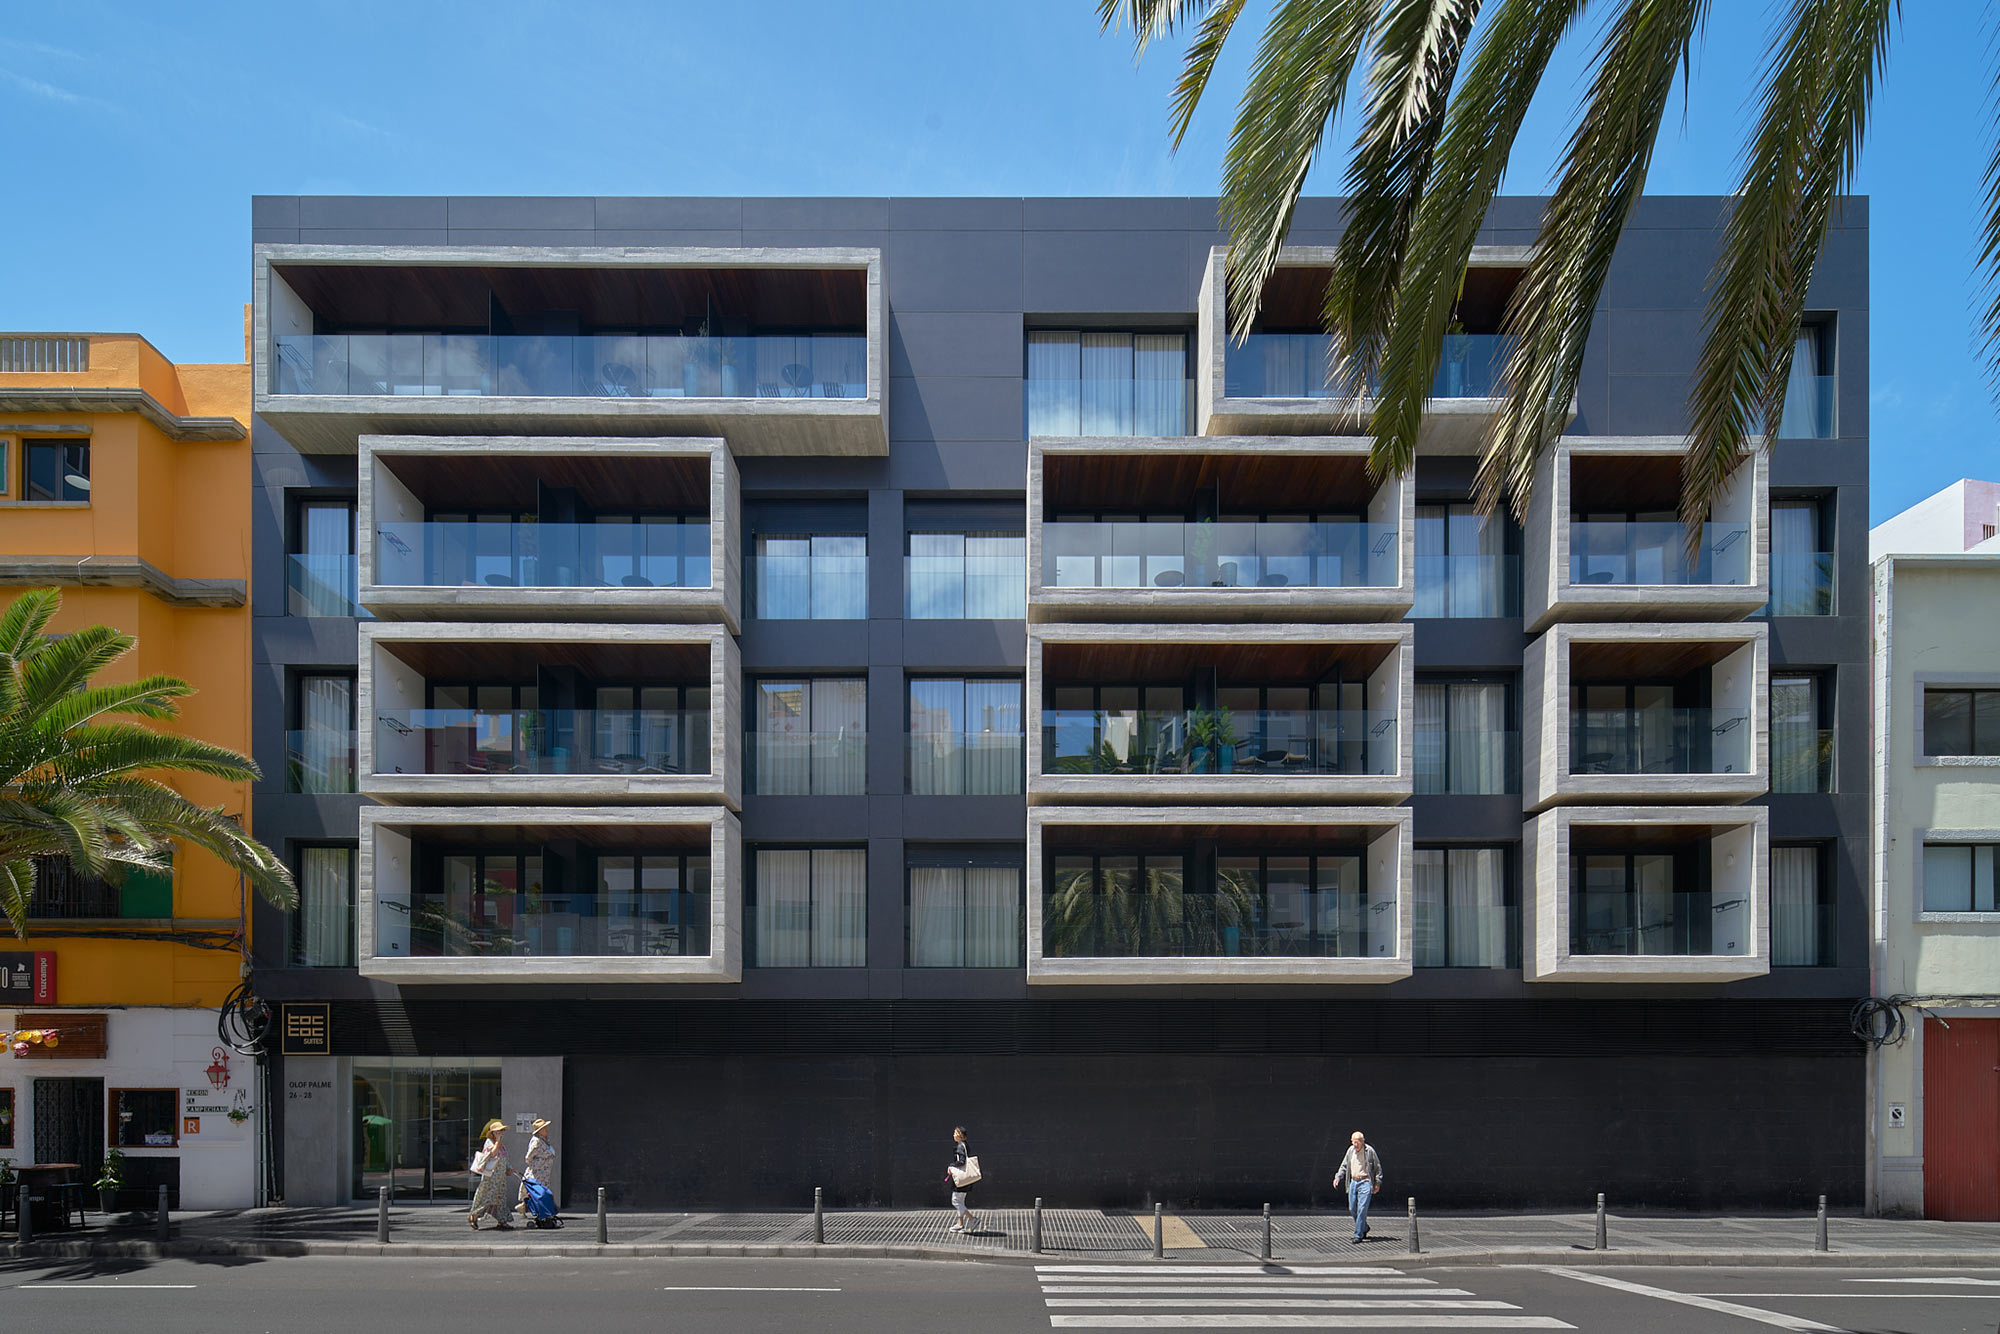 Image of Marina Guanarteme 18 in Dekton Keranium brings a modern and luxurious look to the façade of this exclusive development in Nerja - Cosentino